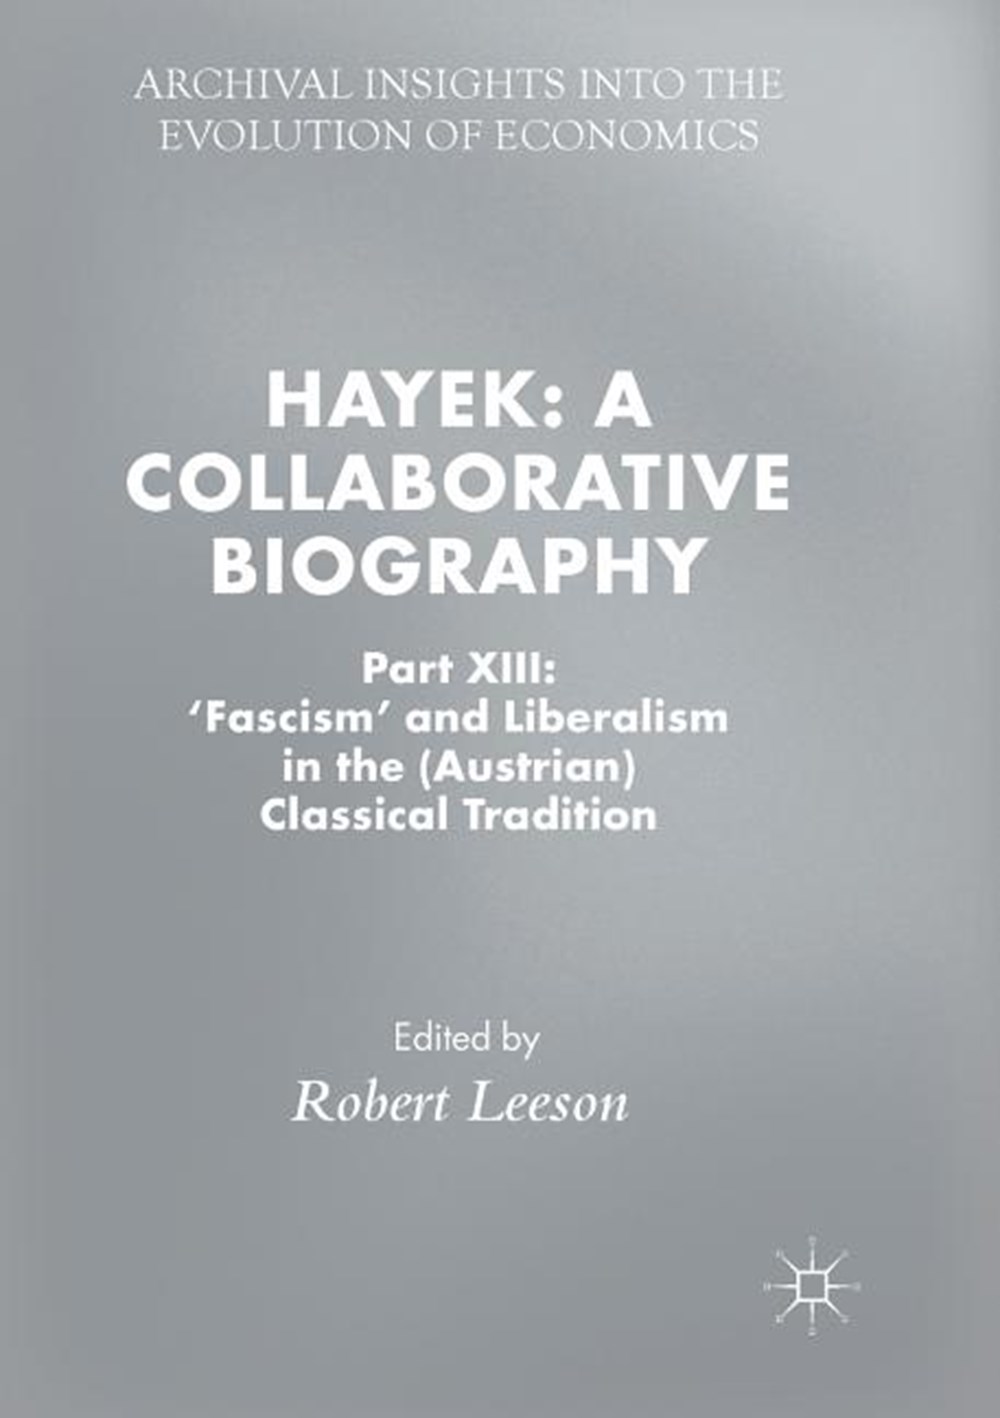 Hayek A Collaborative Biography: Part VIII: The Constitution of Liberty: 'shooting in Cold Blood', H